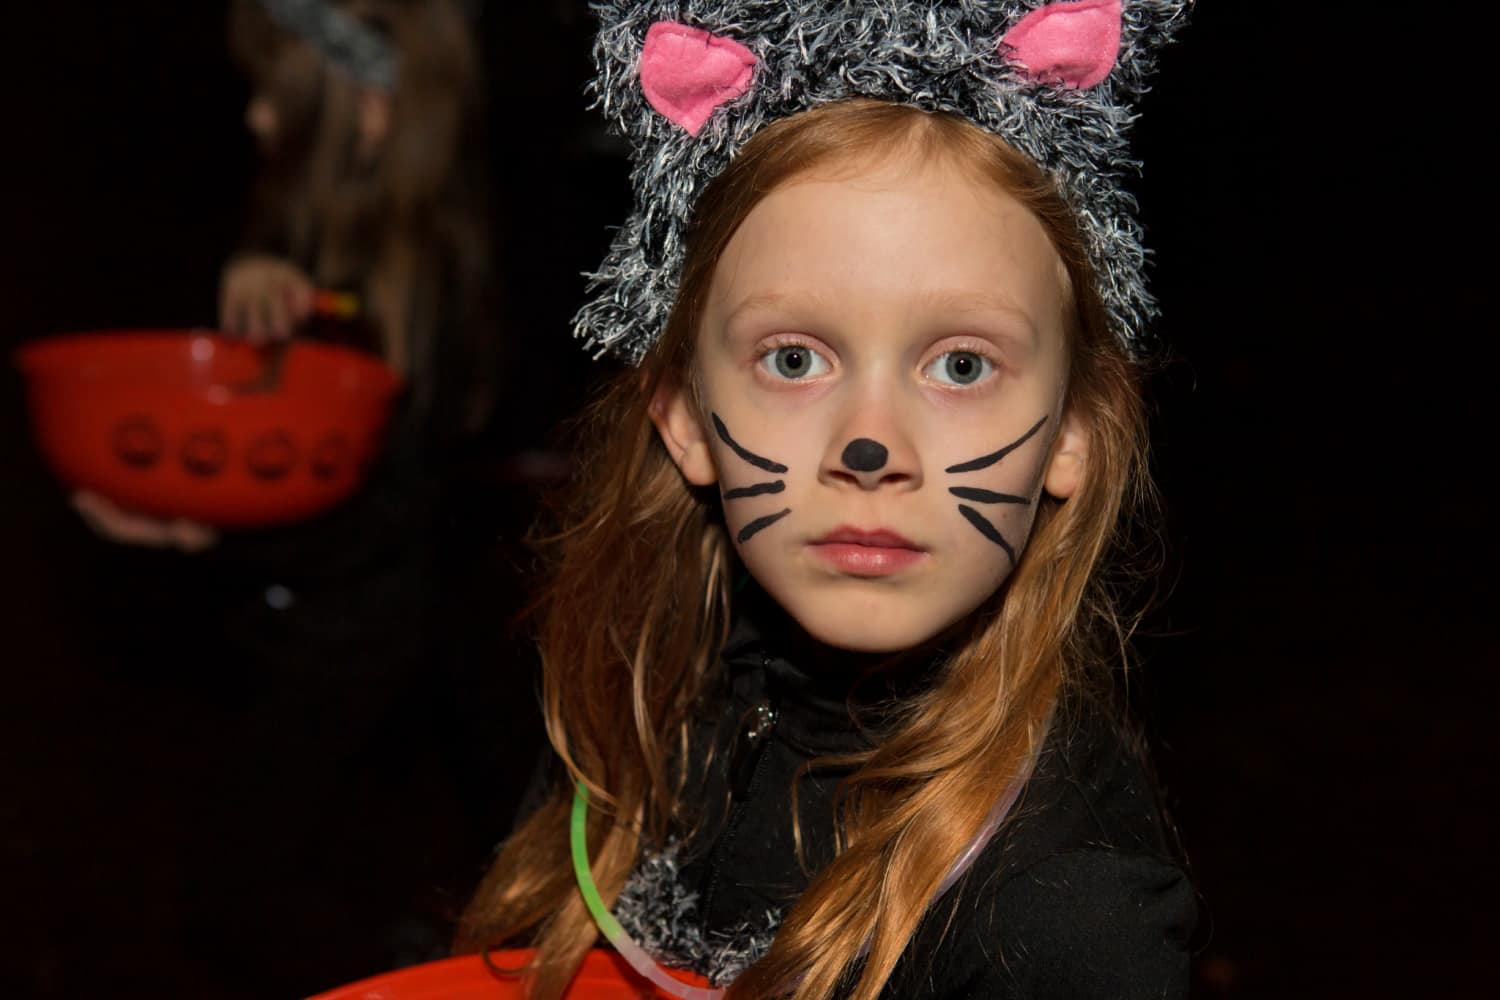 How To Make Halloween Fun... Even If You Can't Trick-or-Treat